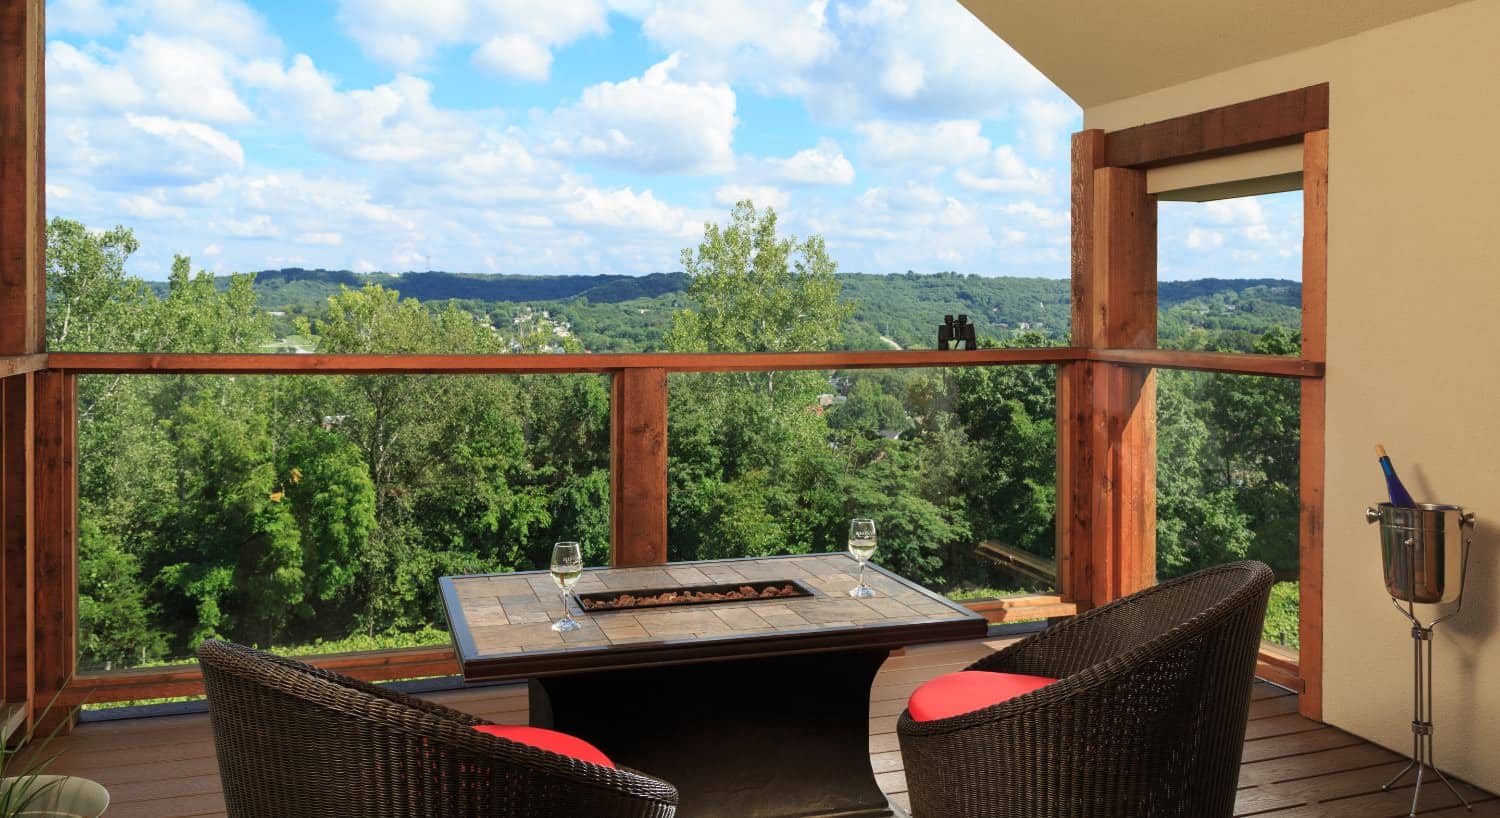 Enclosed deck with dark wicker patio furniture, red cushions, table fire pit, and view of green trees and hills in the background